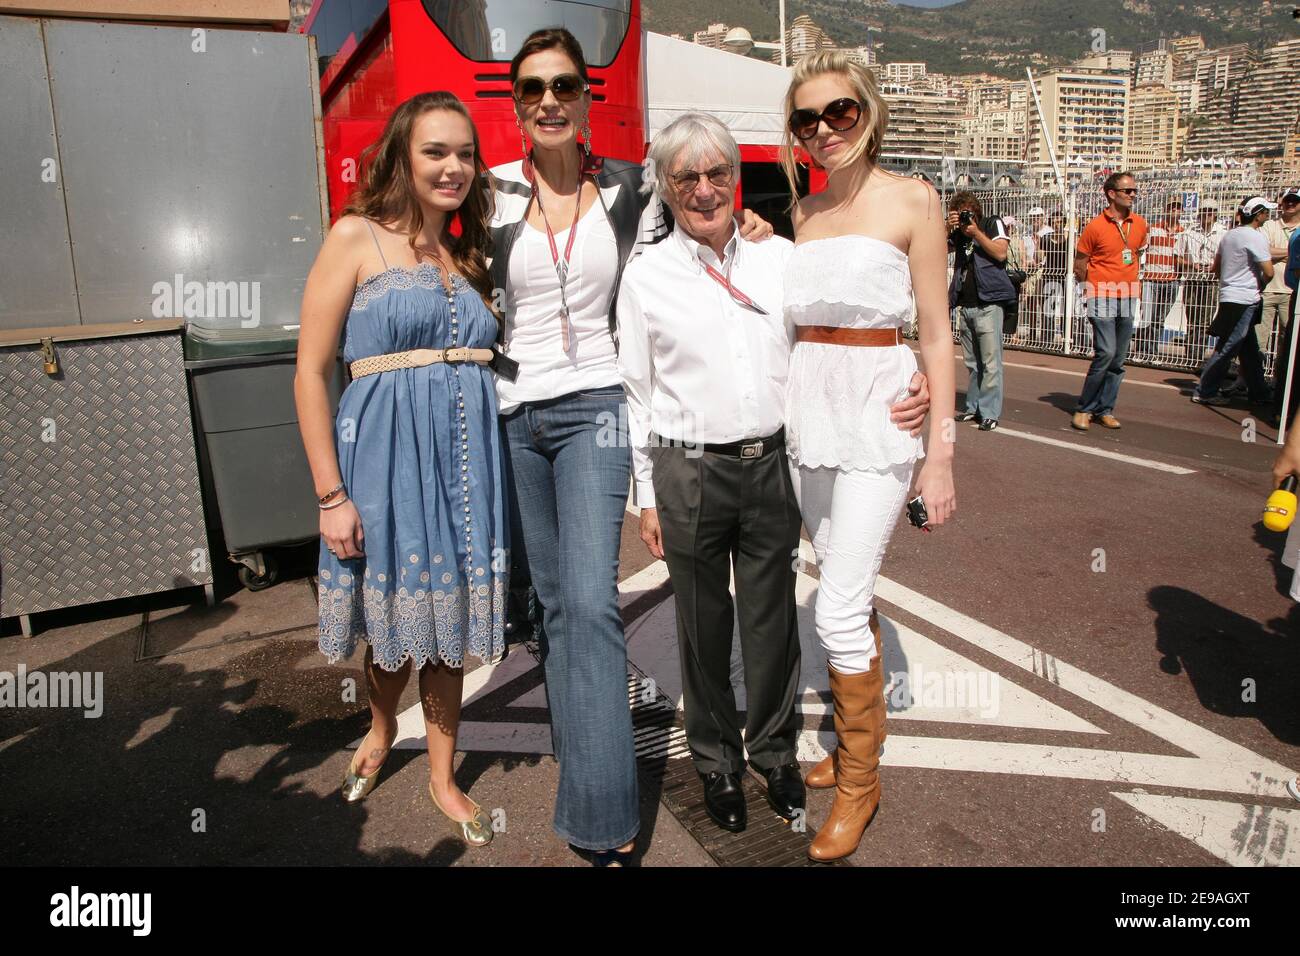 FOM boss Bernie Ecclestone poses with his wife Slavica and their daughters Tamara and Petra in the paddock of the 2006 Monaco Formula 1 Grand Prix in Monte-Carlo on May 28, 2006. Photo by Frederic Nebinger/ABACAPRESS.COM Stock Photo